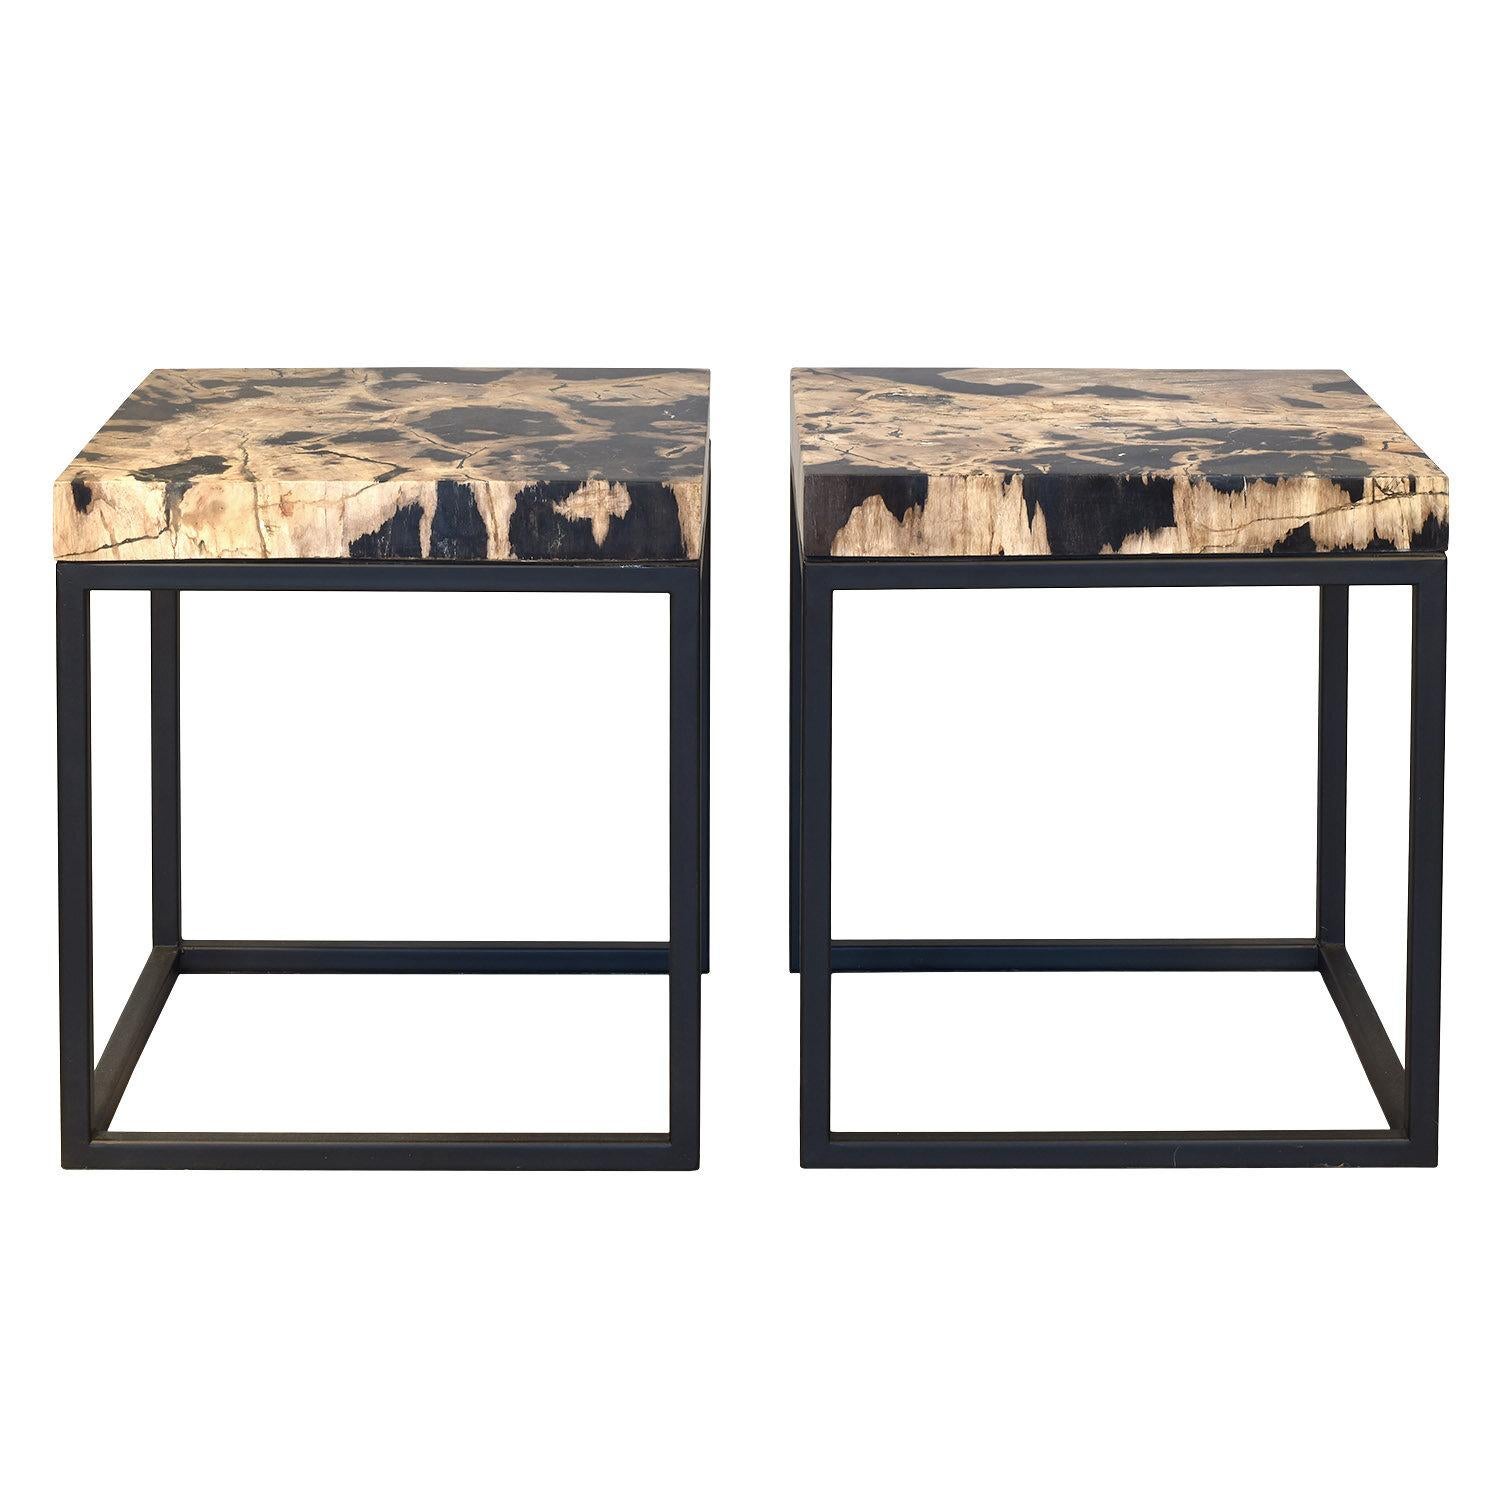 Set of two end tables with petrified wood tabletops from Indonesia

The petrified wood slab tabletop is from a millions of years old Indonesian fossilized rainforest. The table frame is black painted metal.

Petrified wood is a fossilized organic